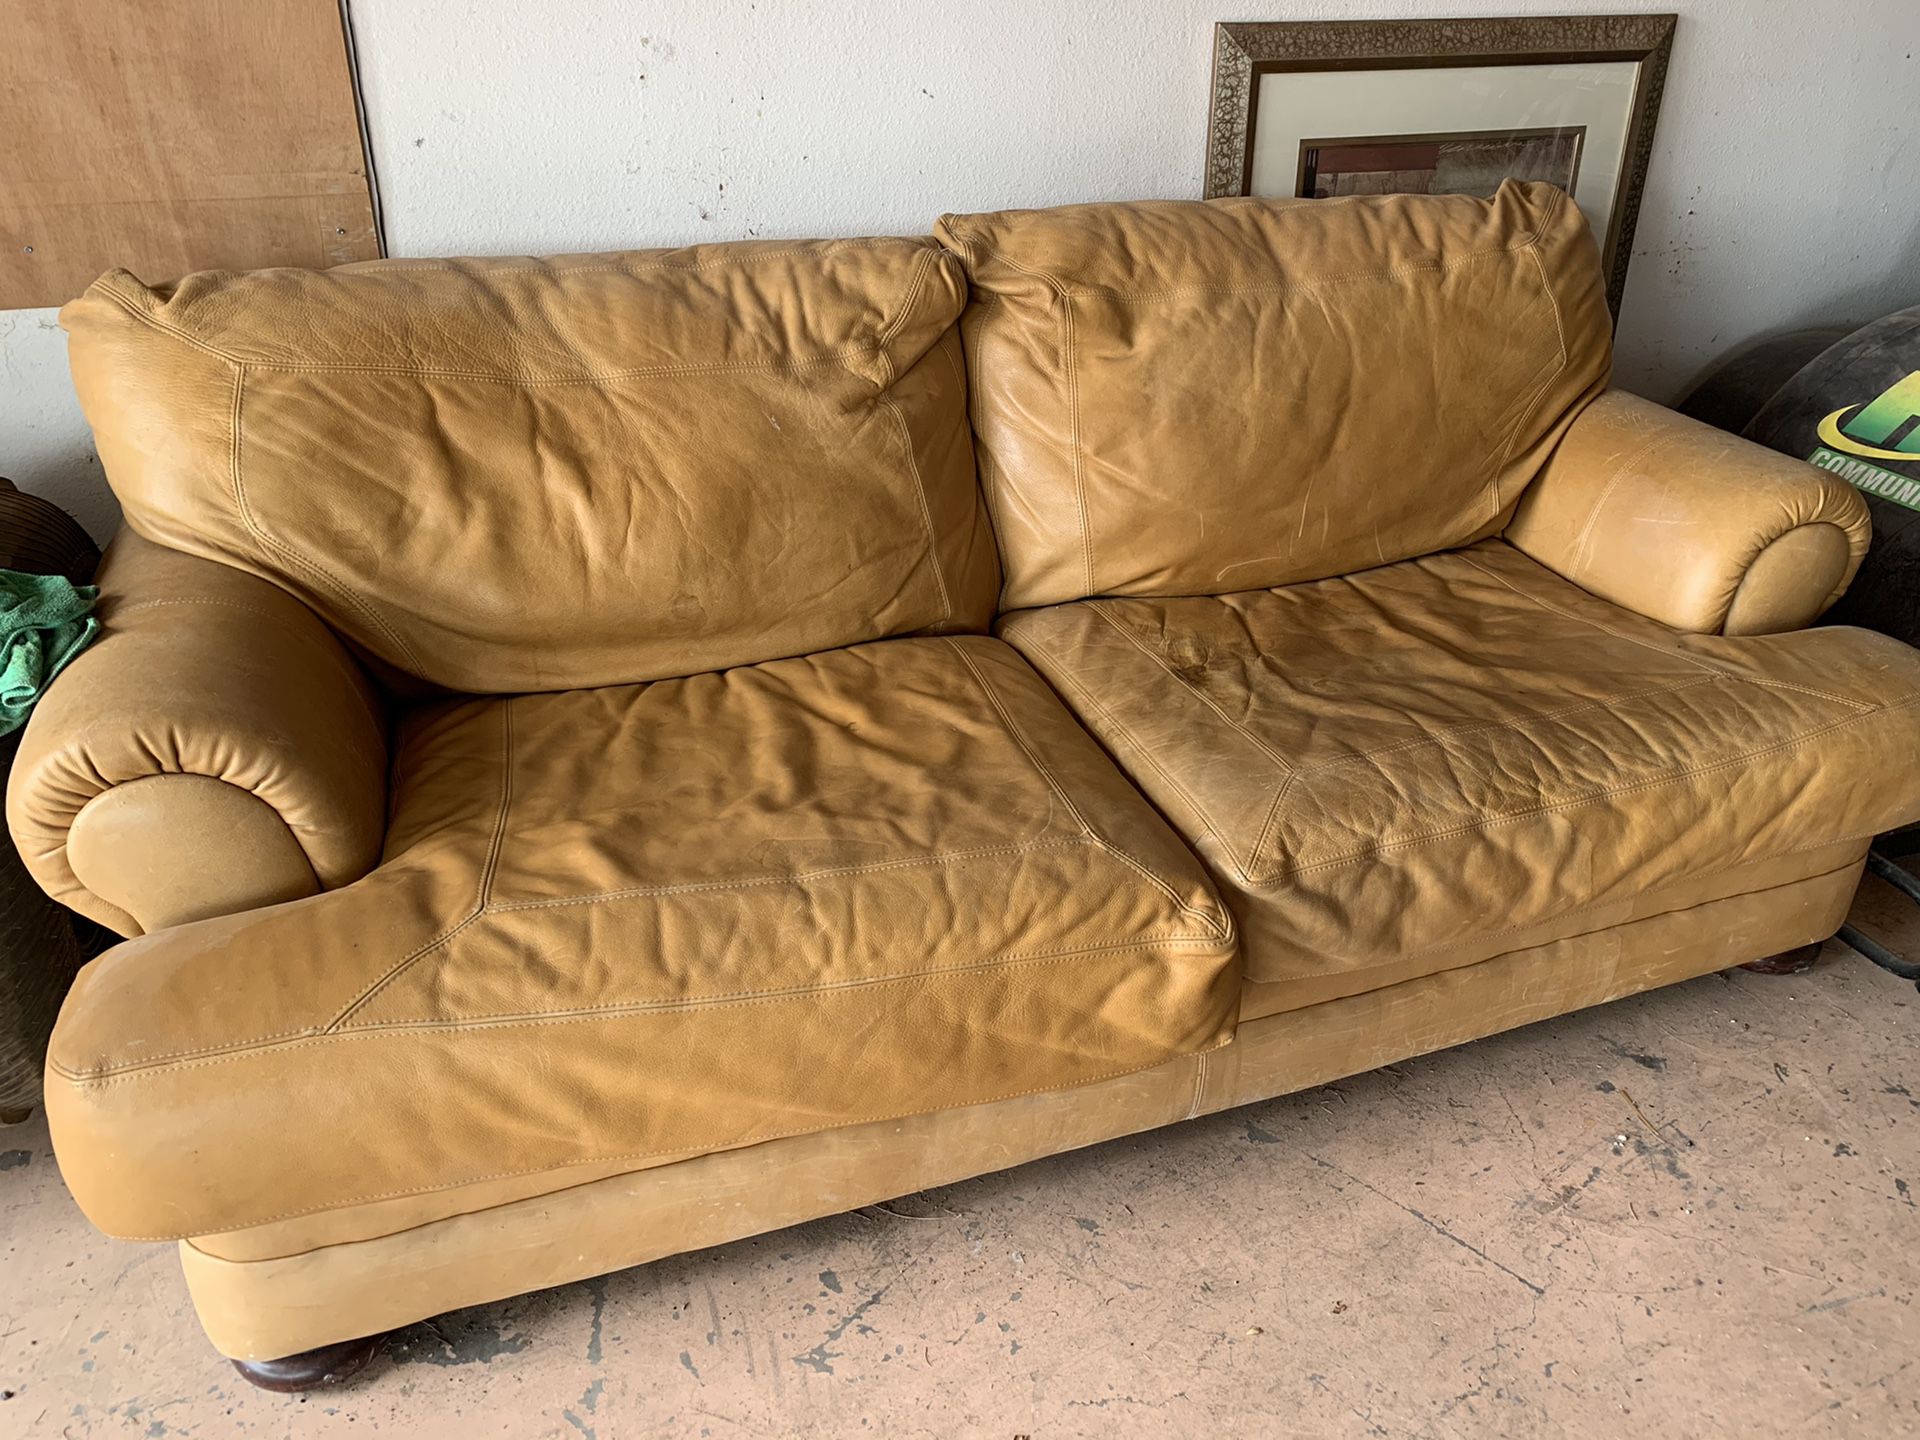 Overstuffed Leather Couch